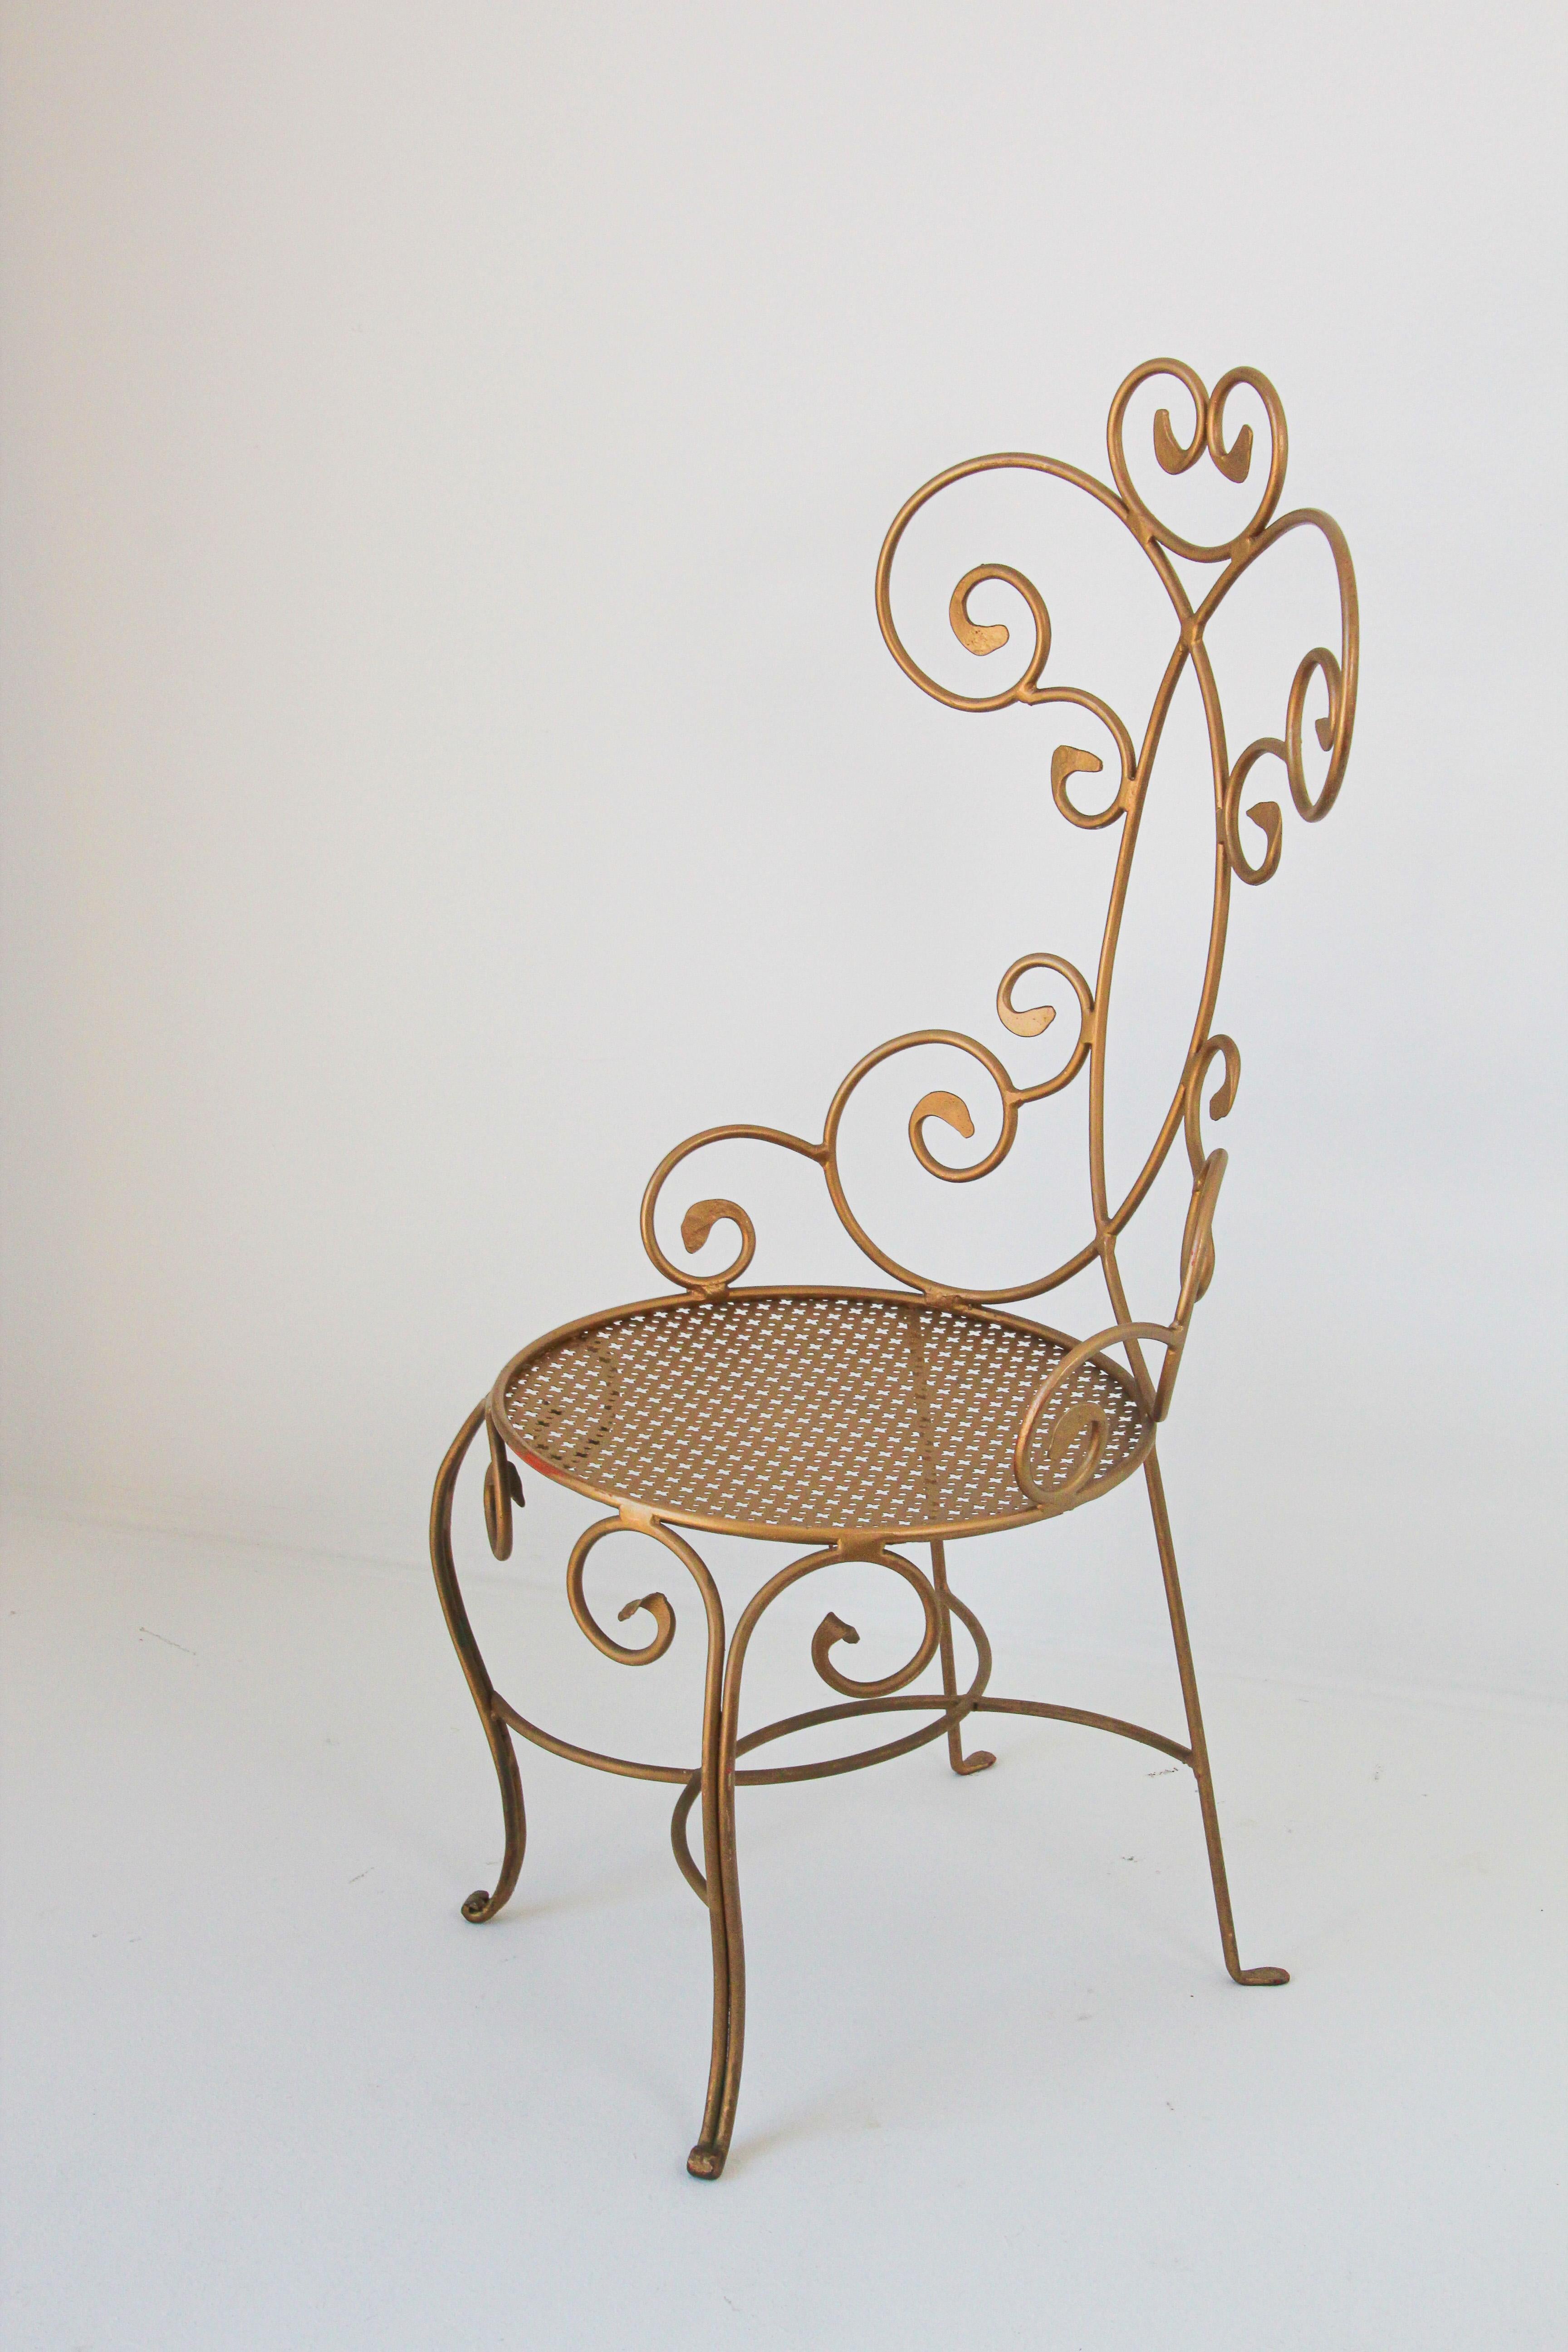 1960s vintage Italian Hollywood Regency gilt iron vanity chair.
Petite Italian vanity side chair in gold gilt wrought iron, light weight and perfectly suited for a dressing room, music room, kids space, bedroom or vanity. 
This metal chair can be a